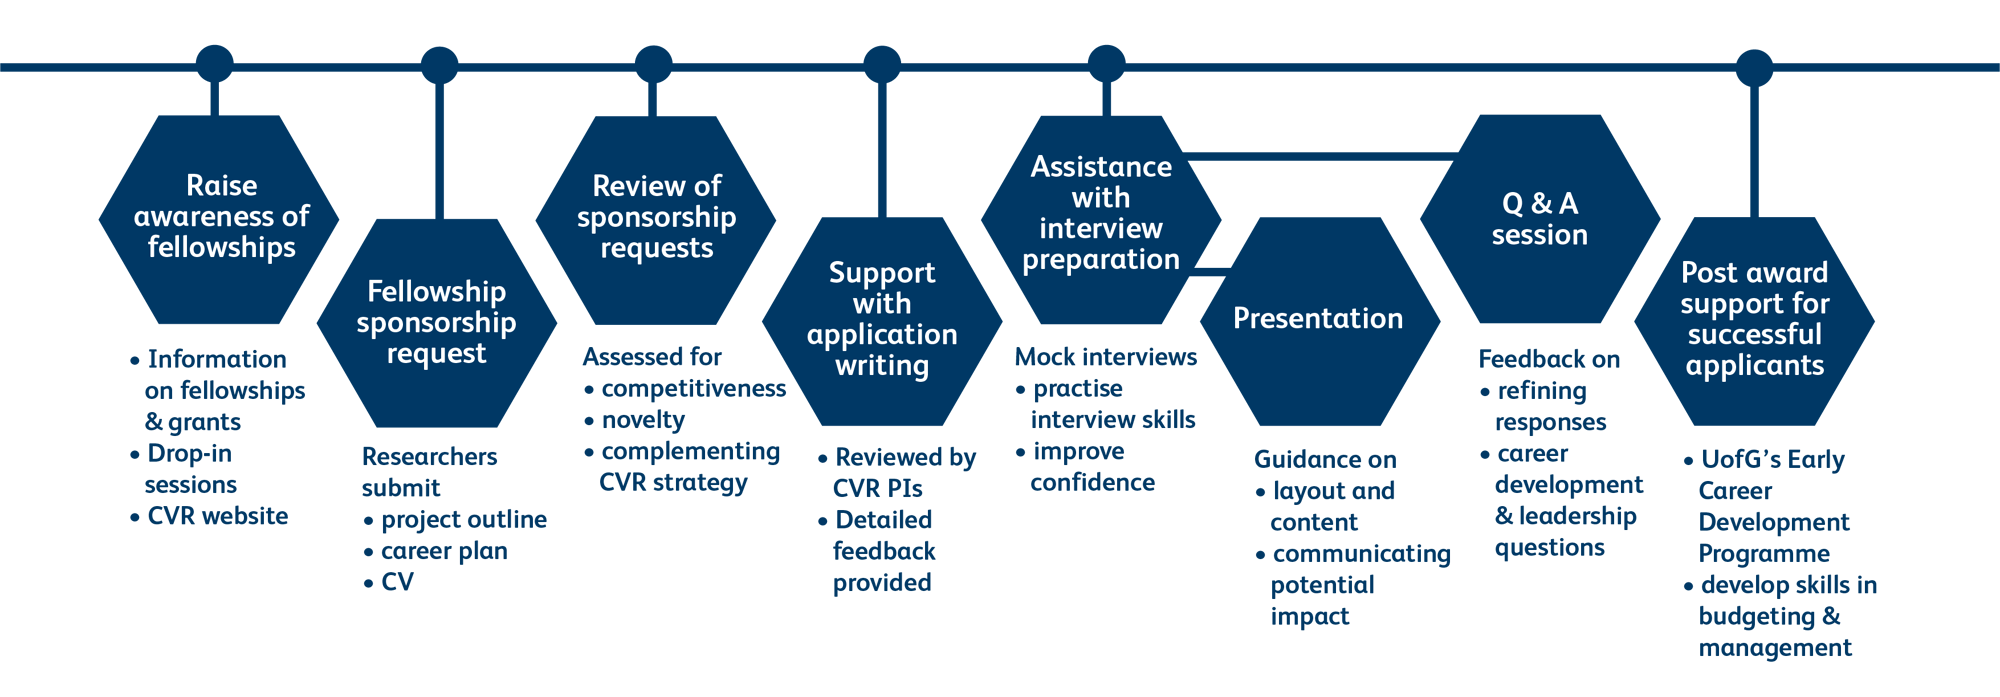 Figure which details the stages of the applications process for a fellowship sponsorship. This information is detailed in the body of text.